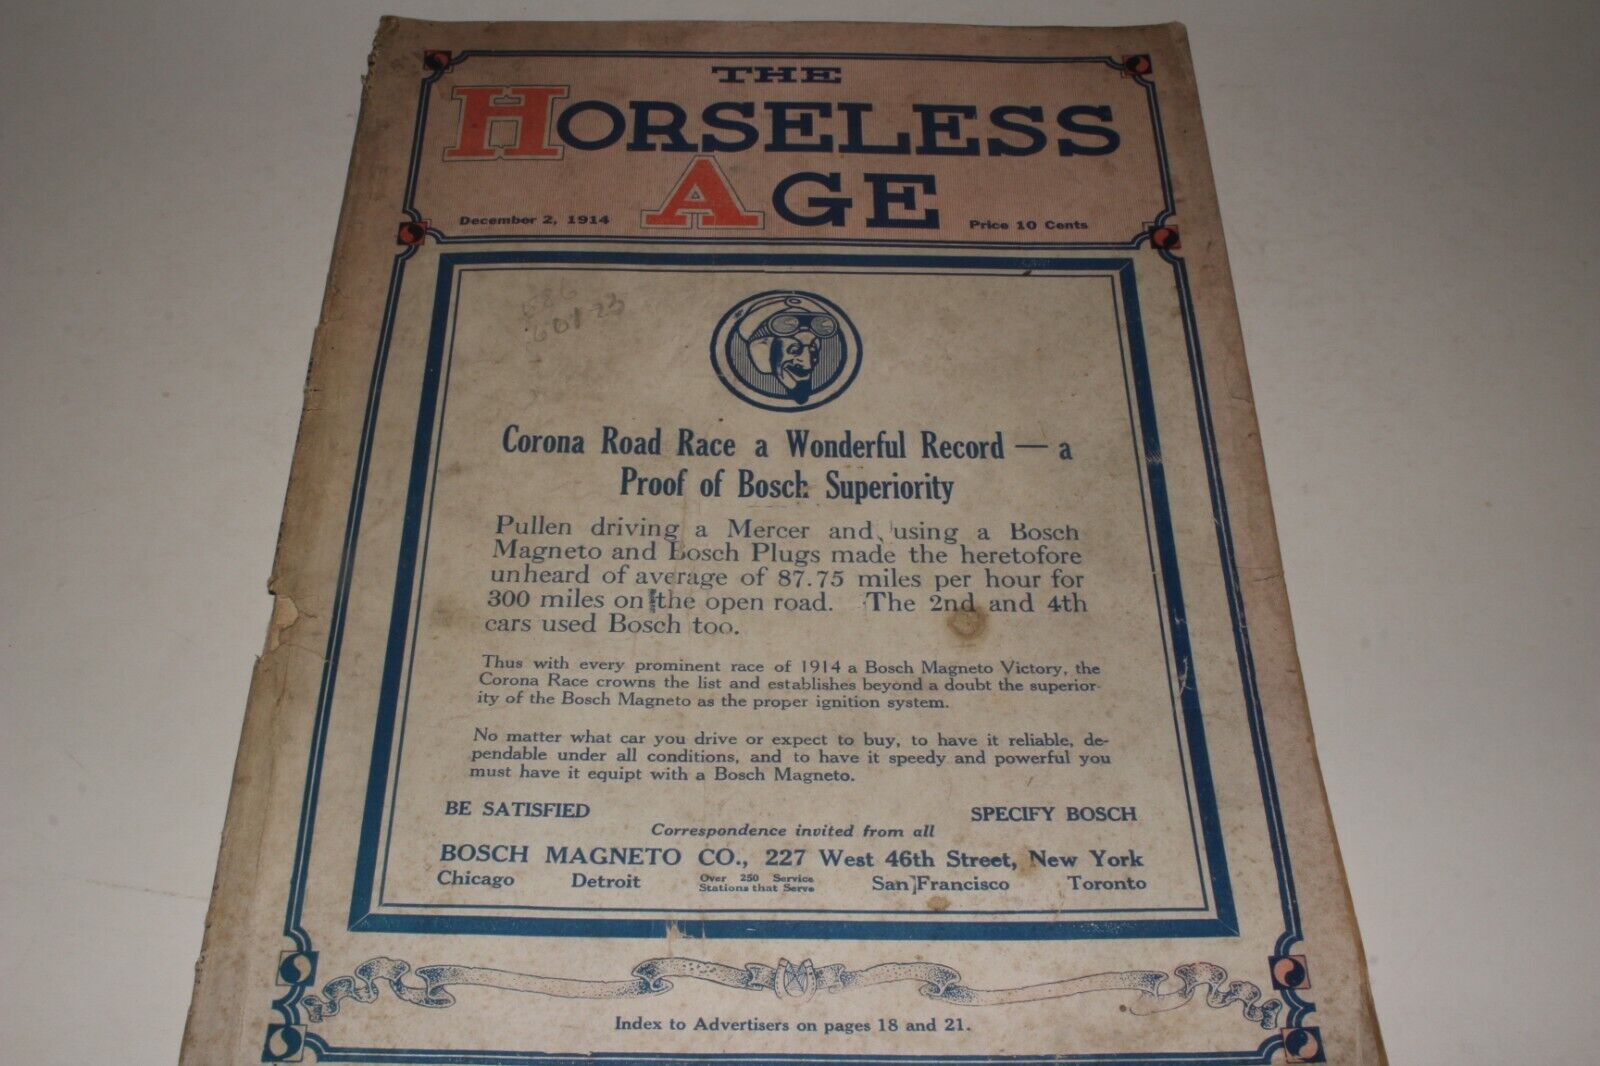 THE HORSELESS AGE MAGAZINE DECEMBER 2, 1914, VOLUME 34, NUMBER 23